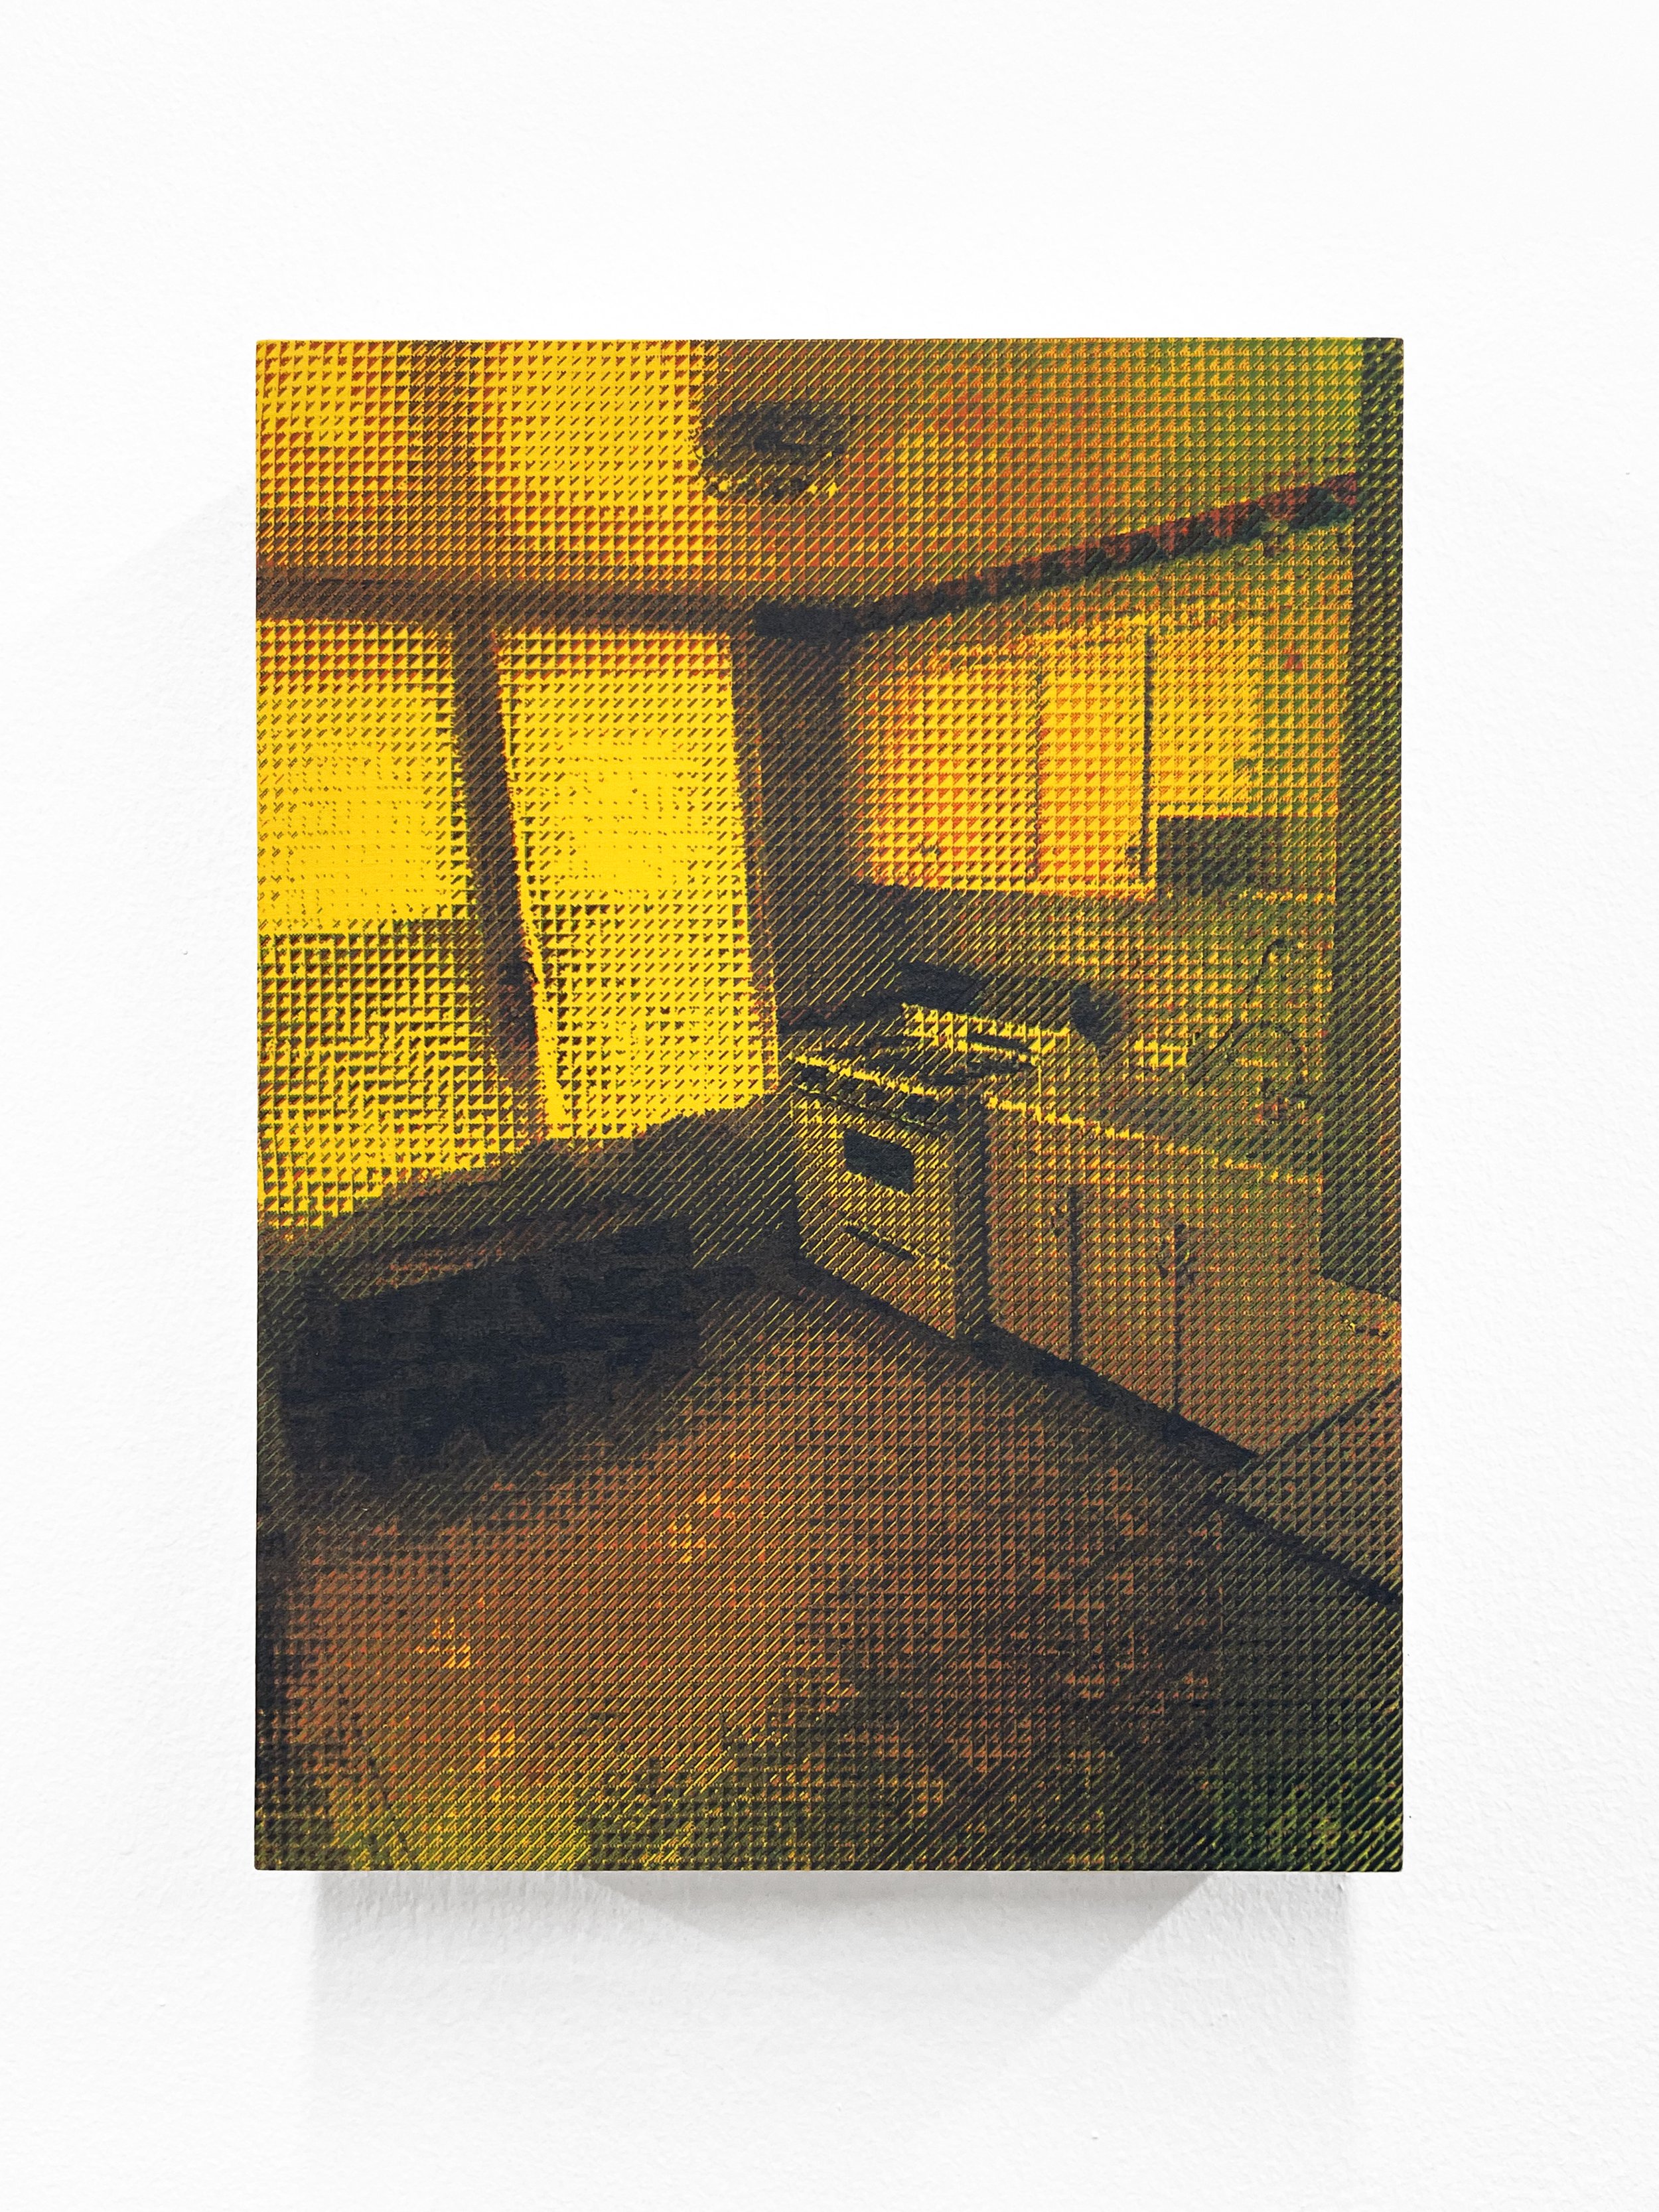    A last look—kitchen No. 2  , Stretched screenprint on poly-cotton fabric, 12” x 9” x 2” 